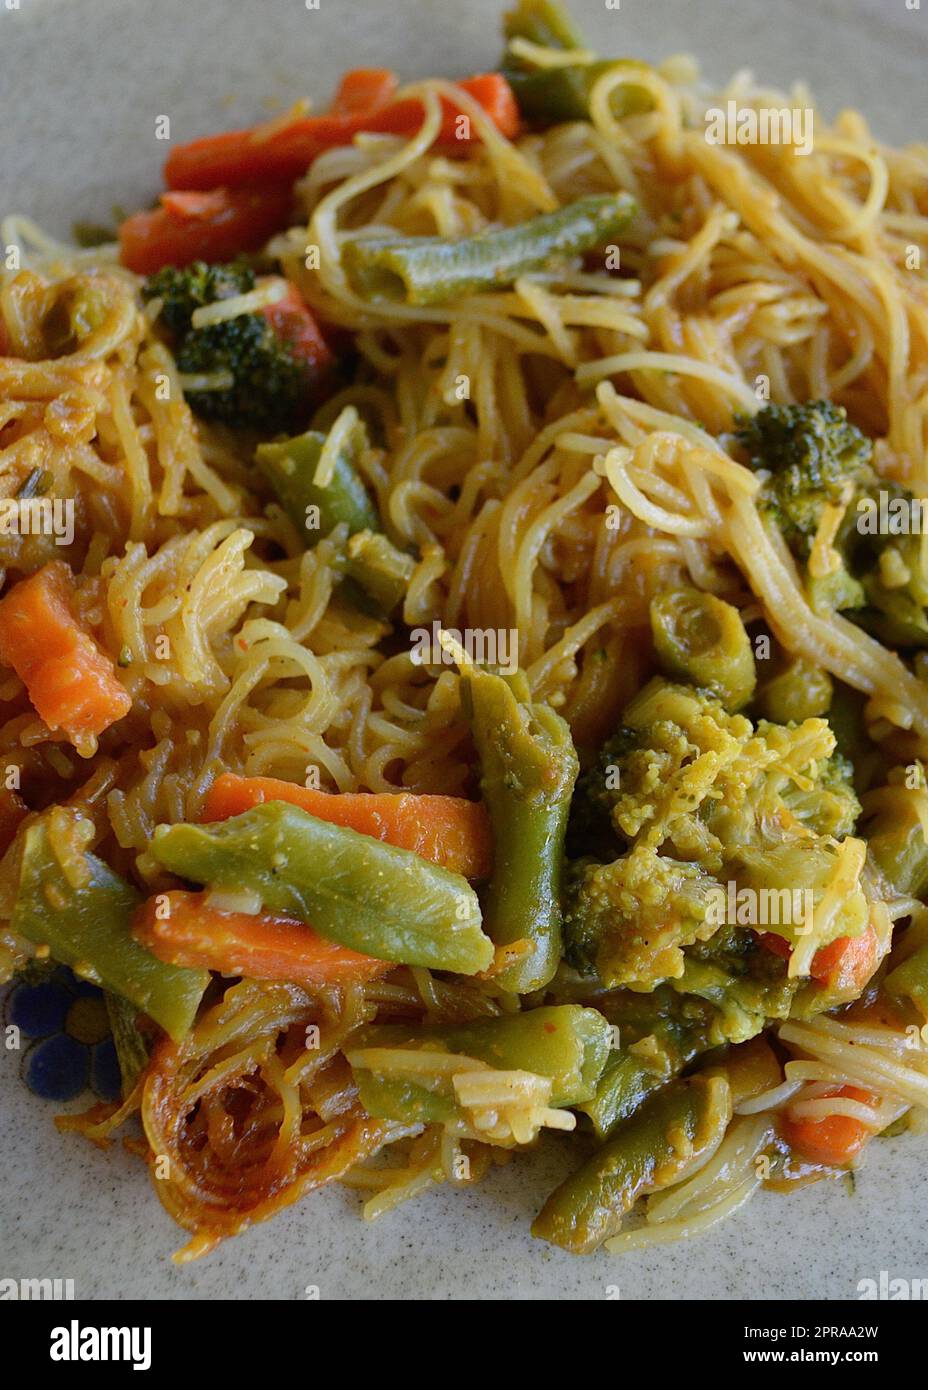 Singapore noodles and vegetables Stock Photo